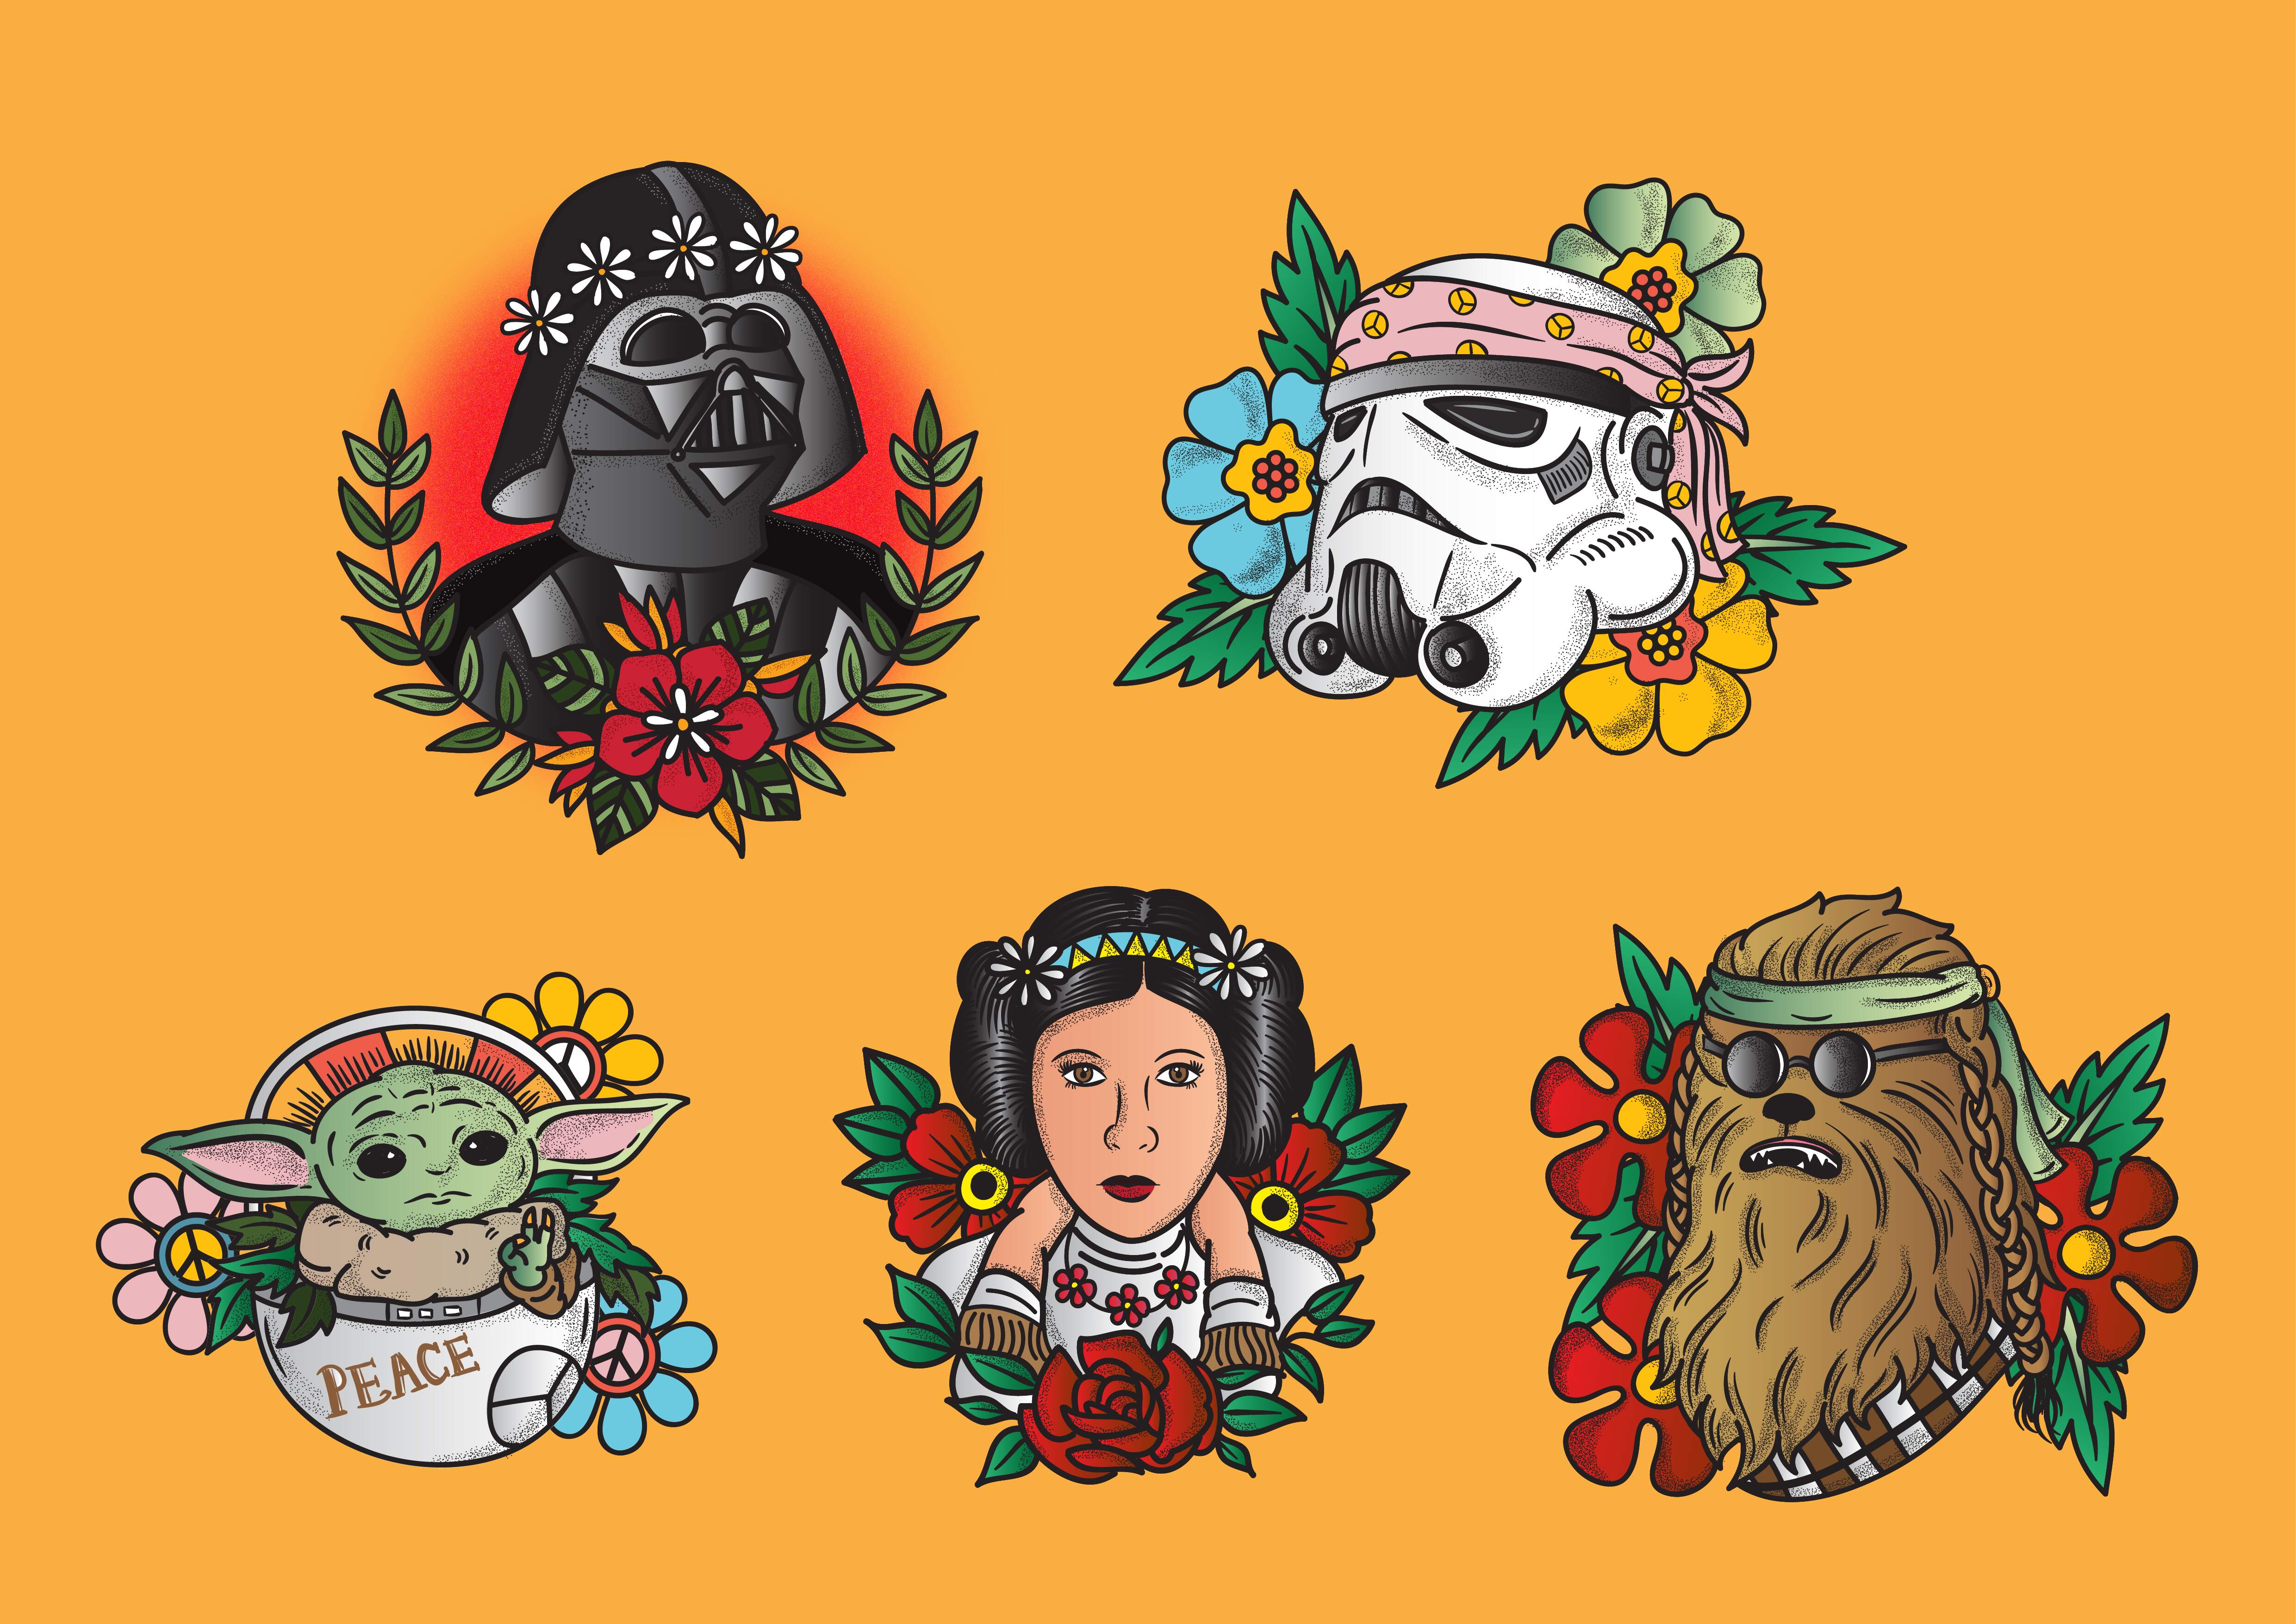 92 Ideas For Star Wars Tattoos That Every Padawan Deserves To See